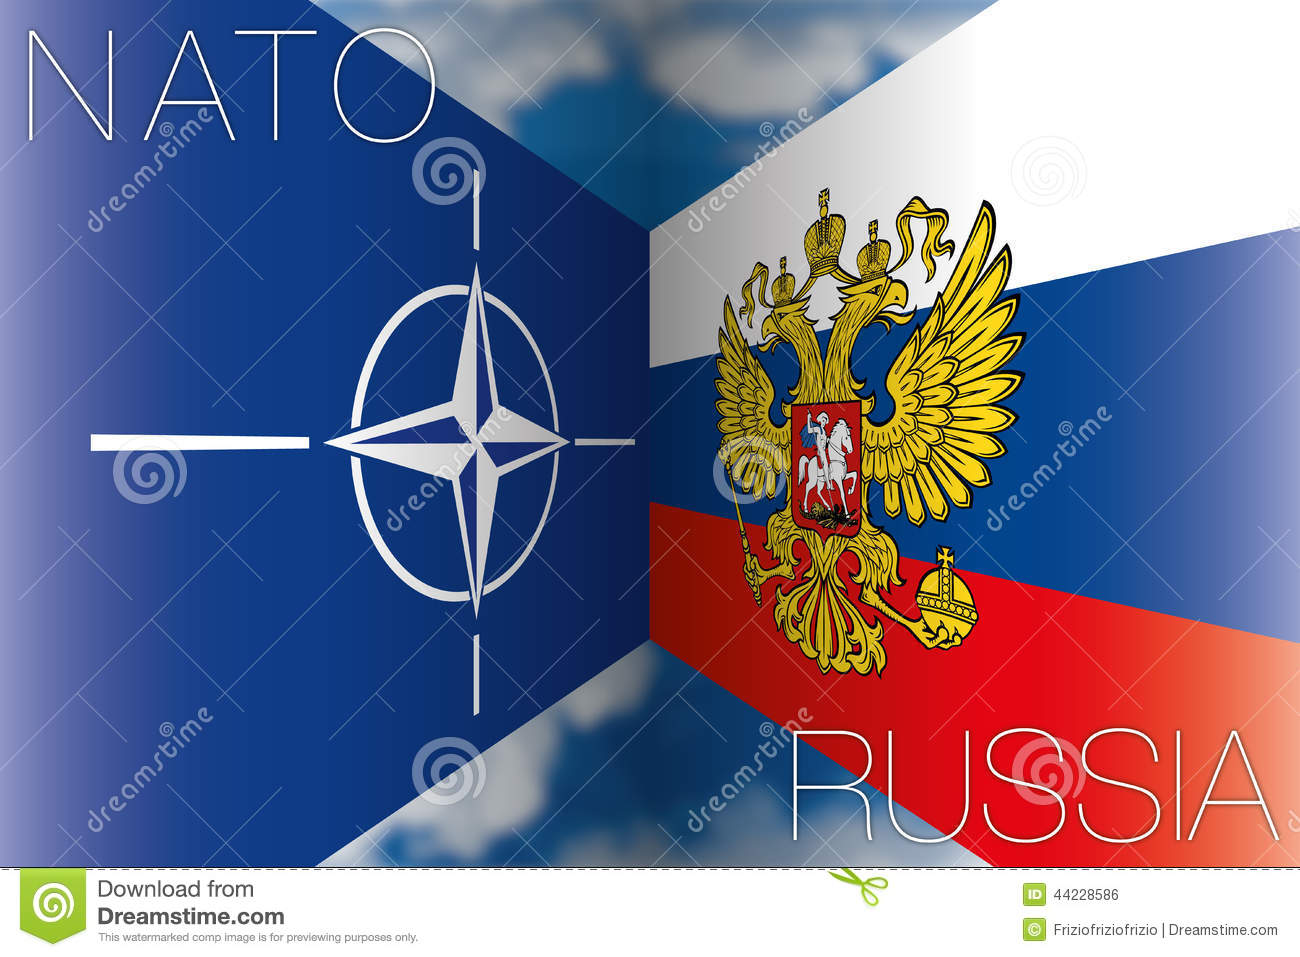 NATO and Russian Flags